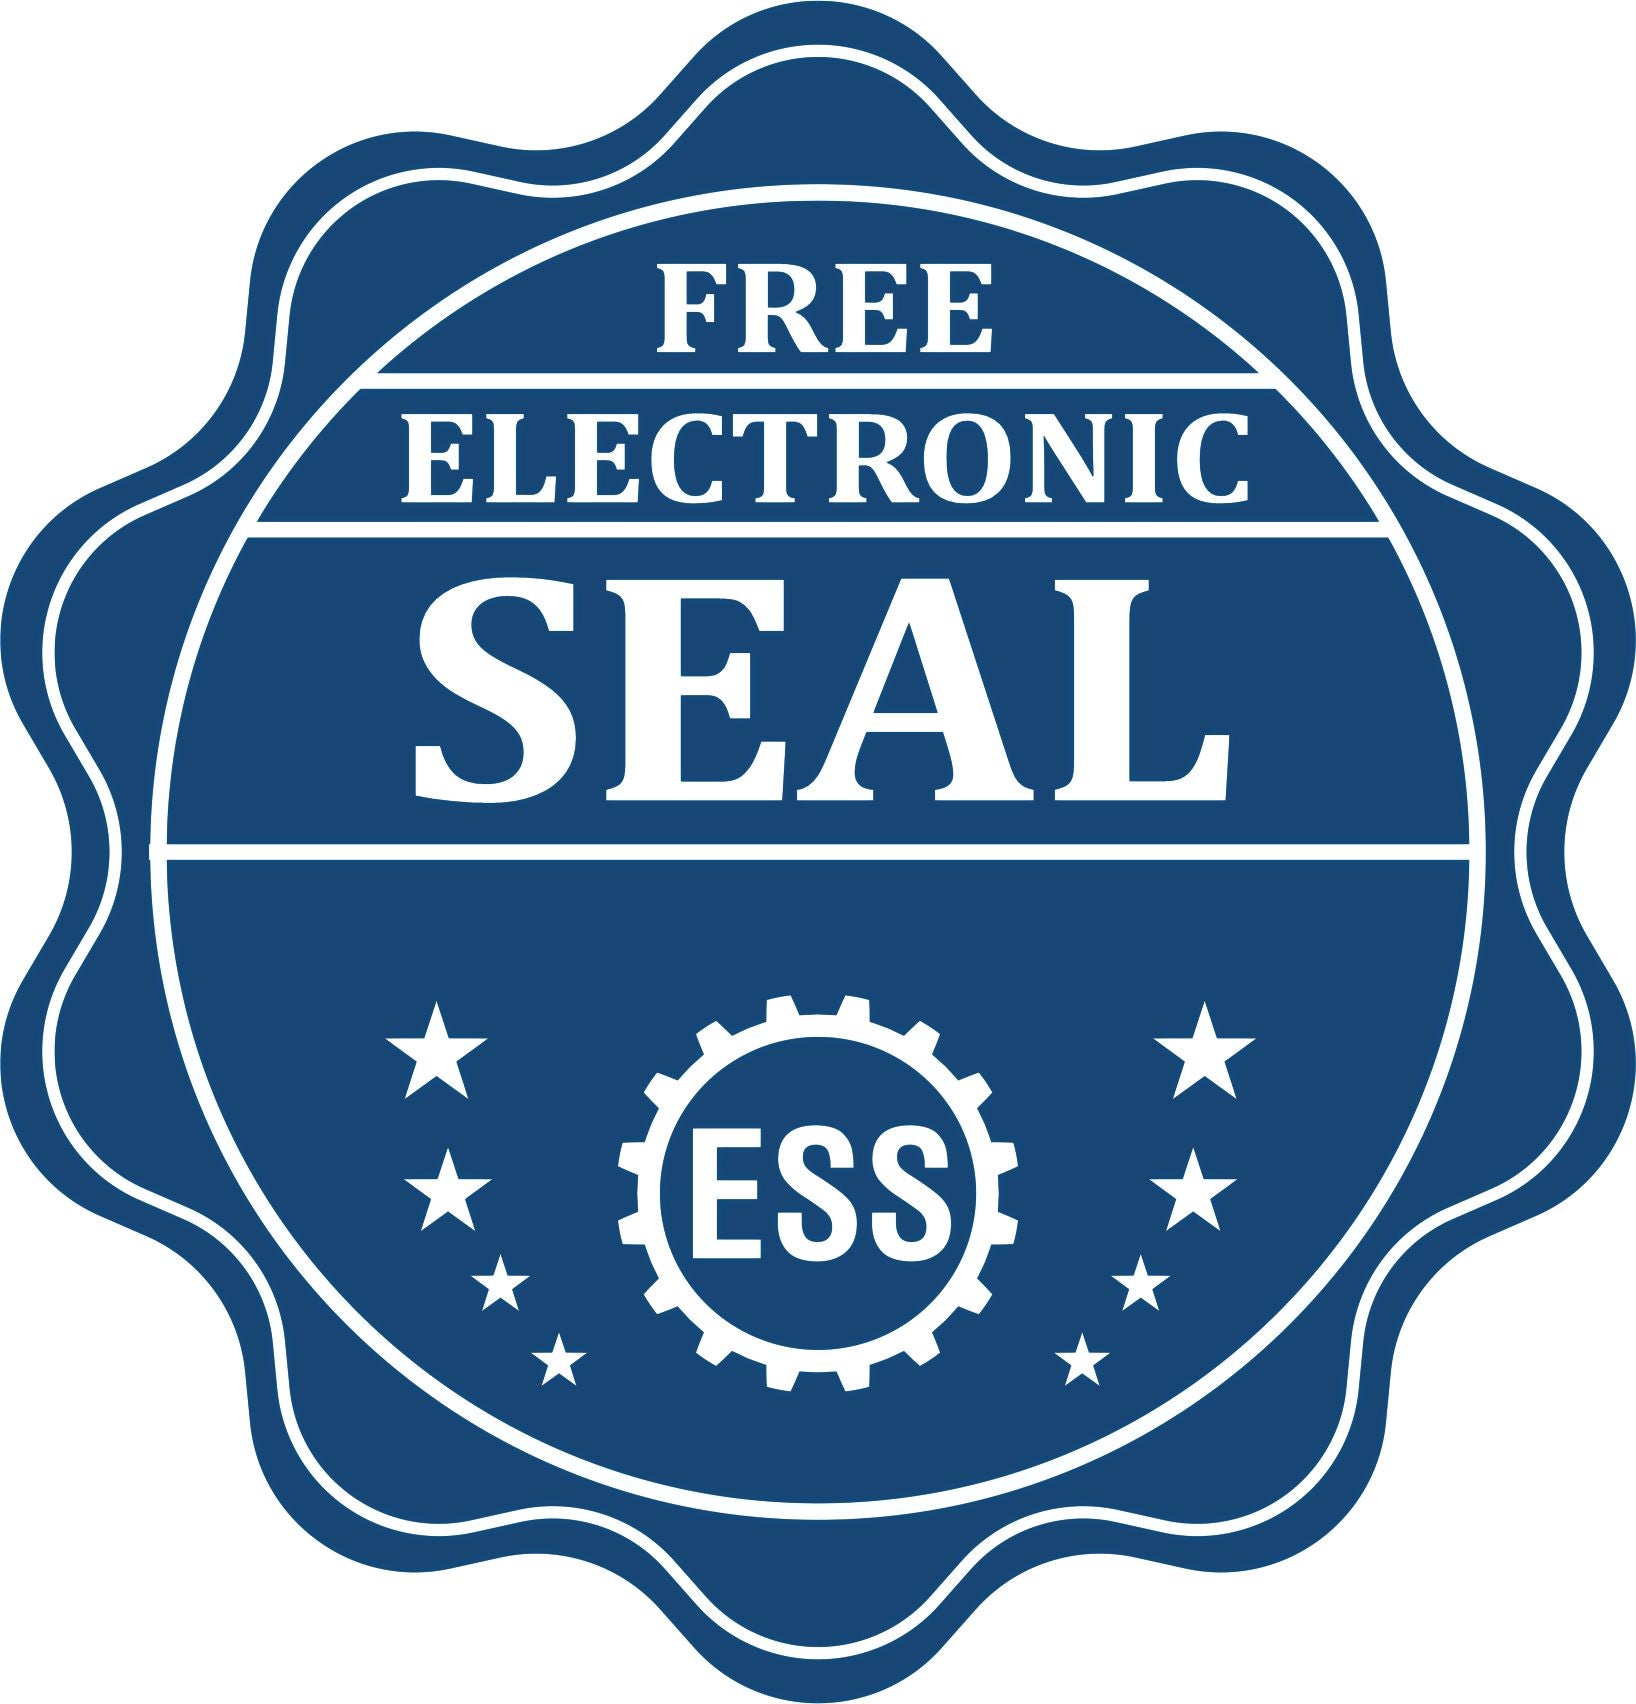 A badge showing a free electronic seal for the Hybrid Illinois Geologist Seal with stars and the ESS gear on the emblem.